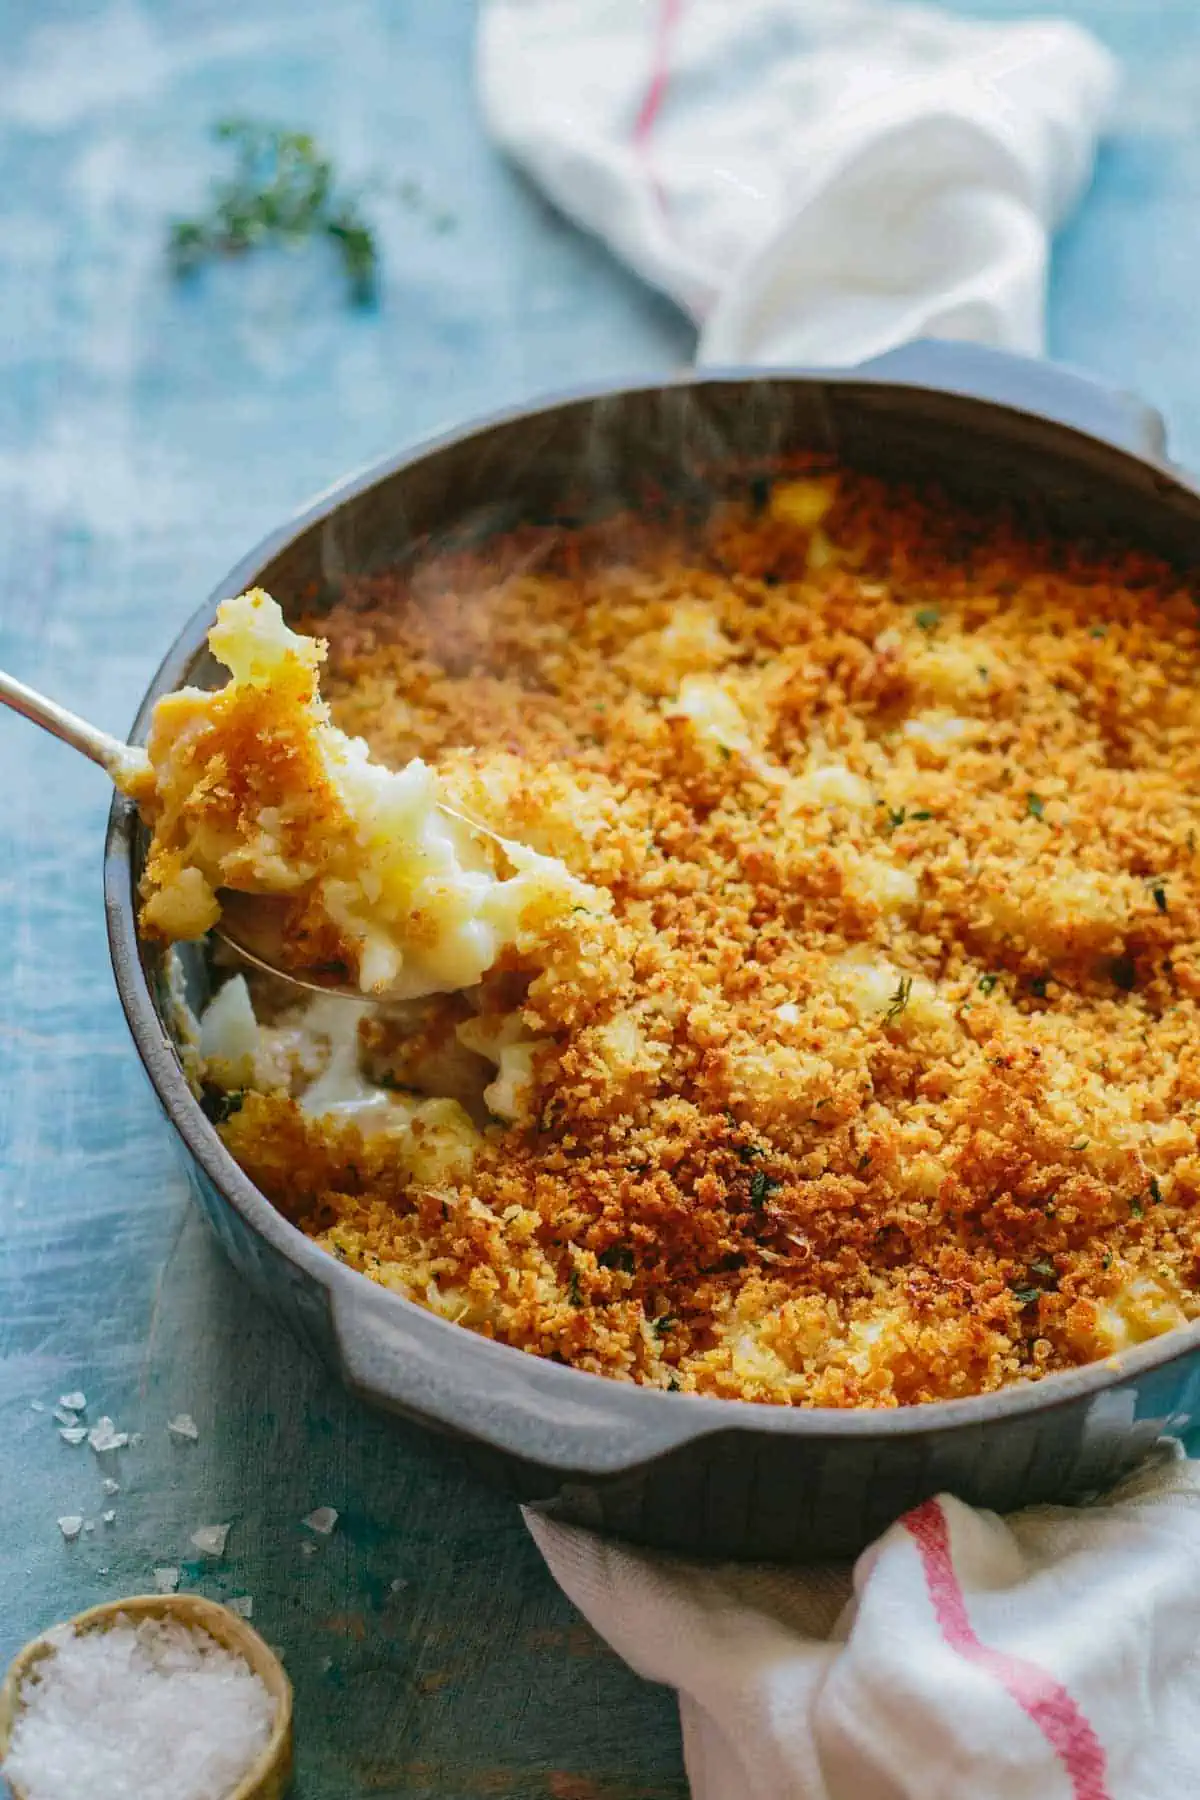 A spoon scooping out baked cauliflower with breadcrumbs from a casserole dish.